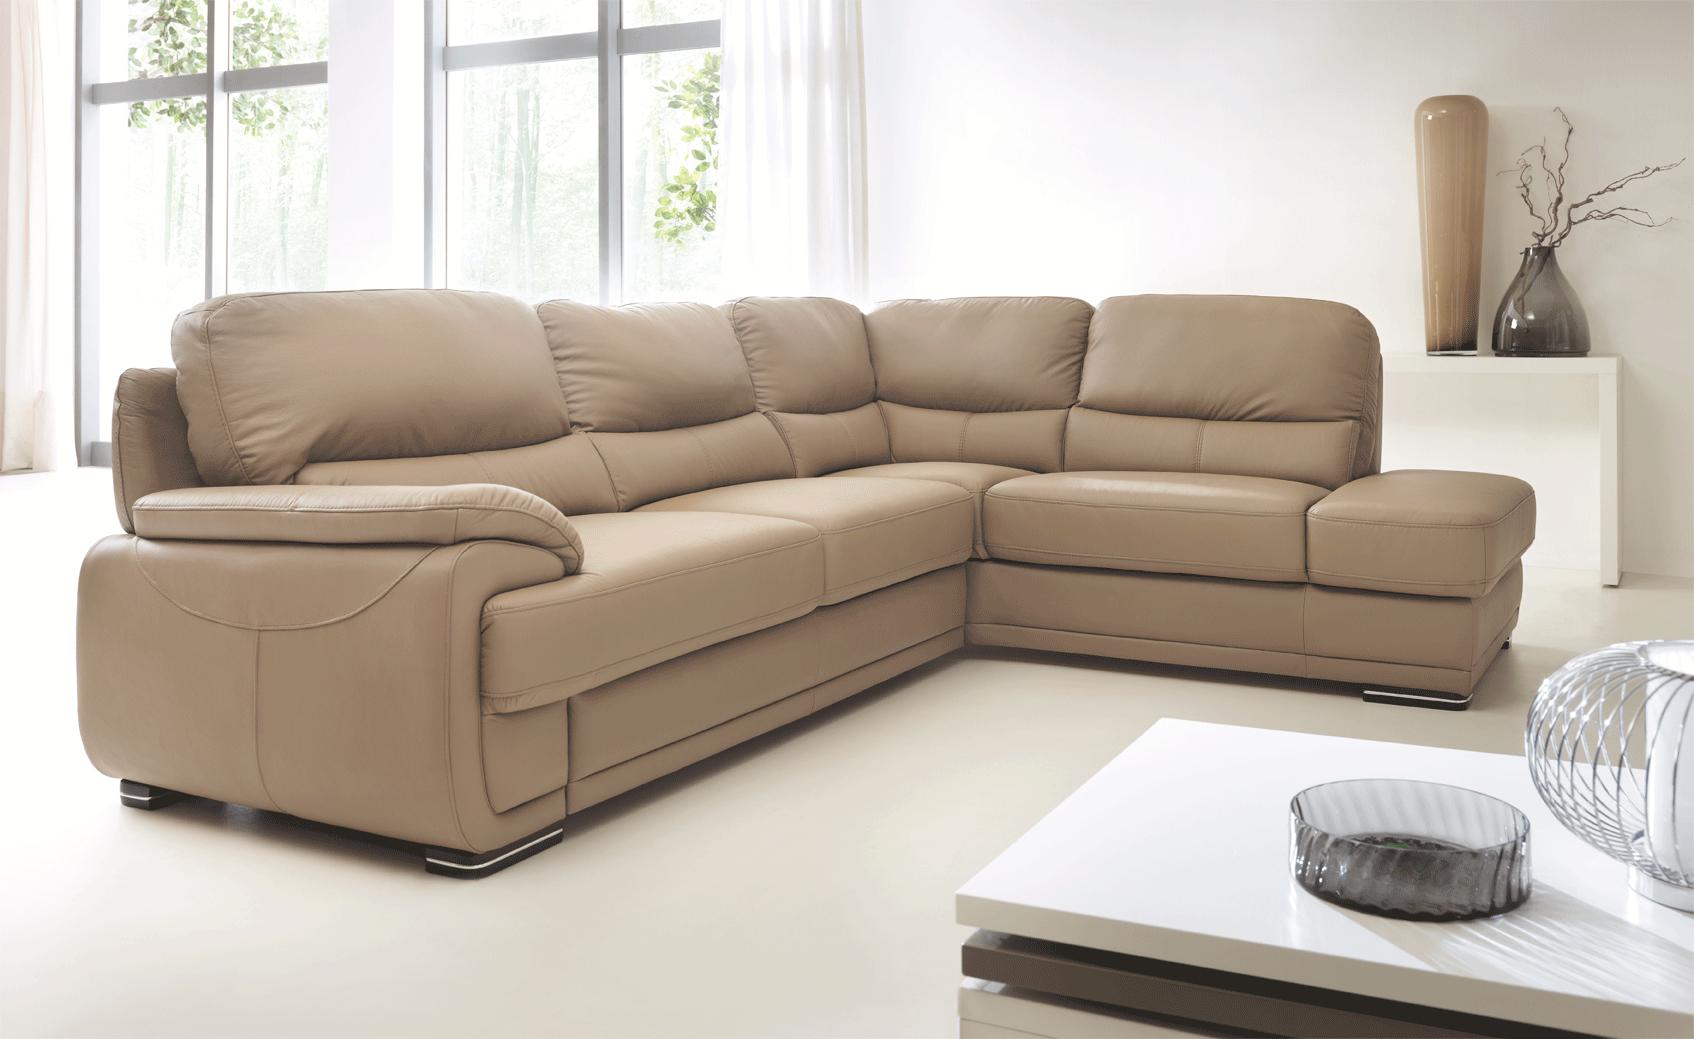 

    
Chic Beige Full Leather Sectional Sofa Bed w/Storage Modern Right ESF Argento
